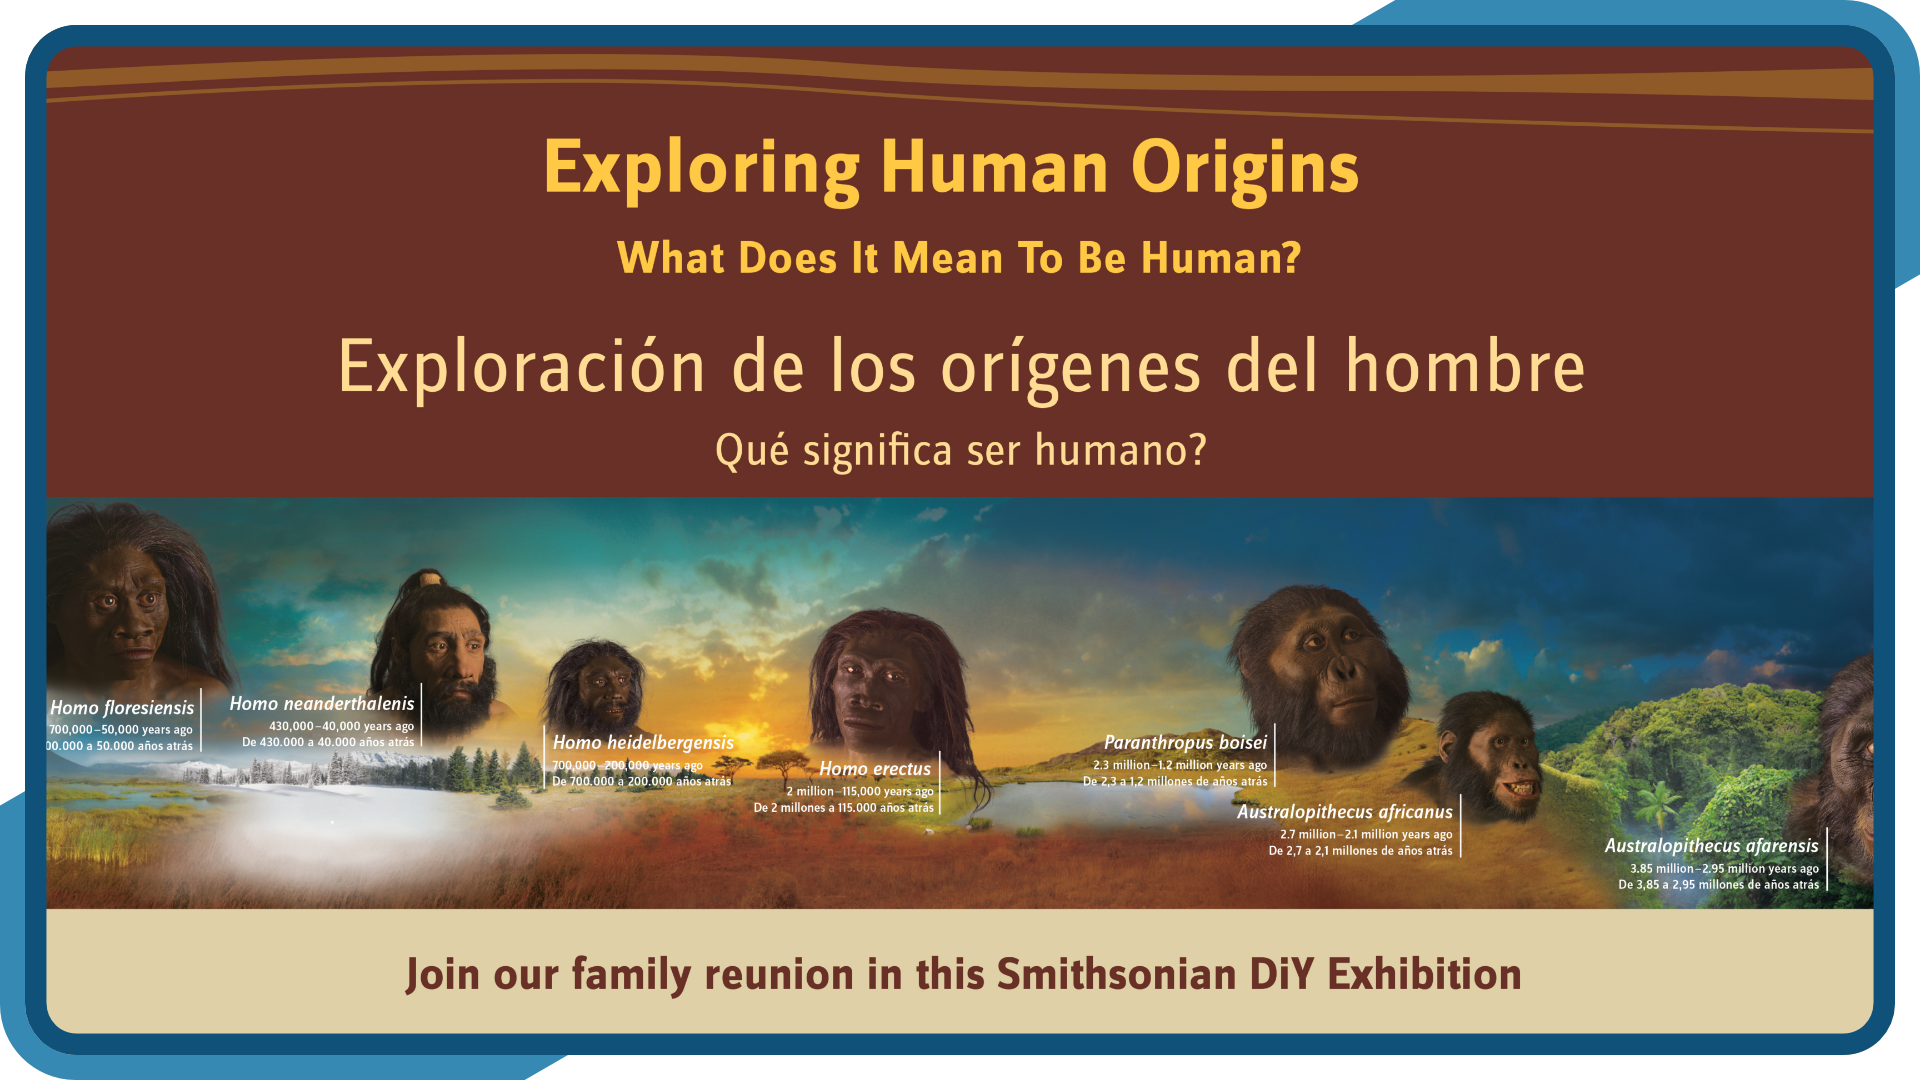 Exploring Human Origins Exhibition in partnership with the Smithsonian National Museum of Natural History